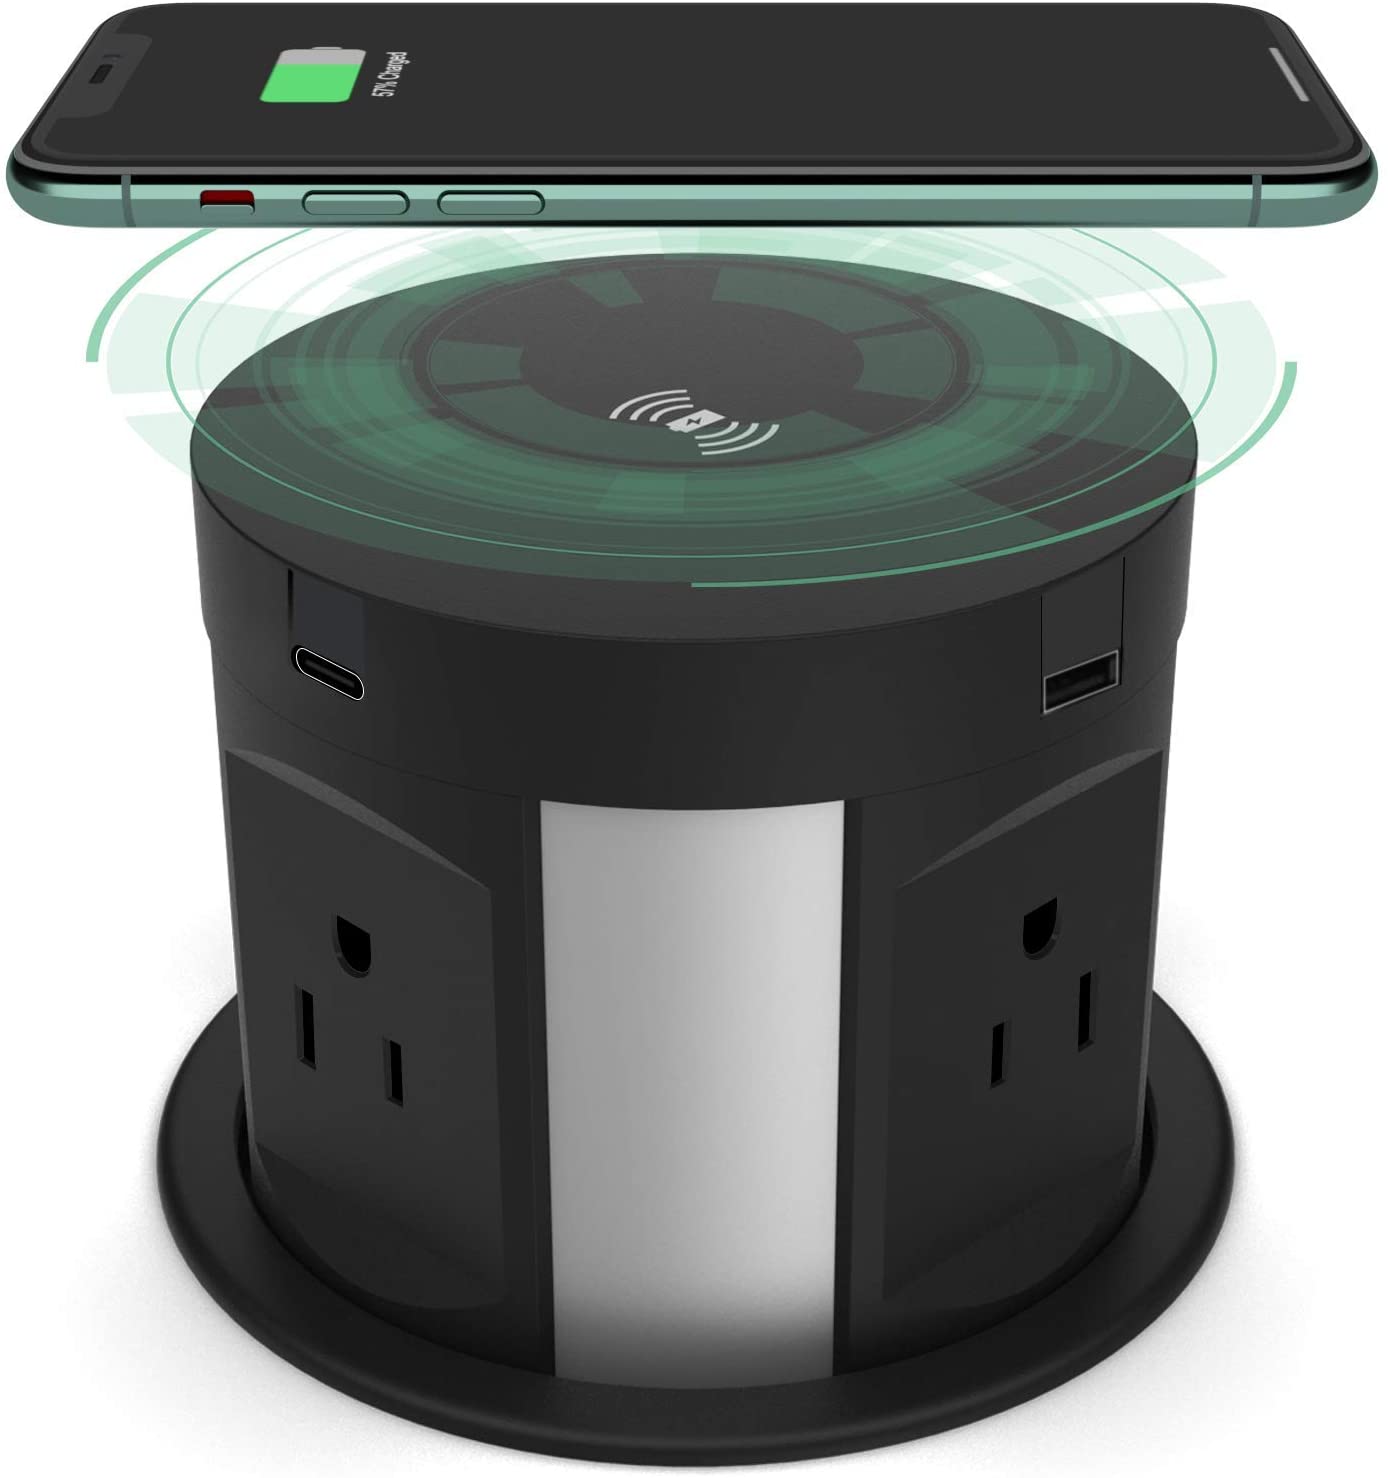 Wireless Charging Kitchen Counter Pop Up With 4 Receptacles with Type